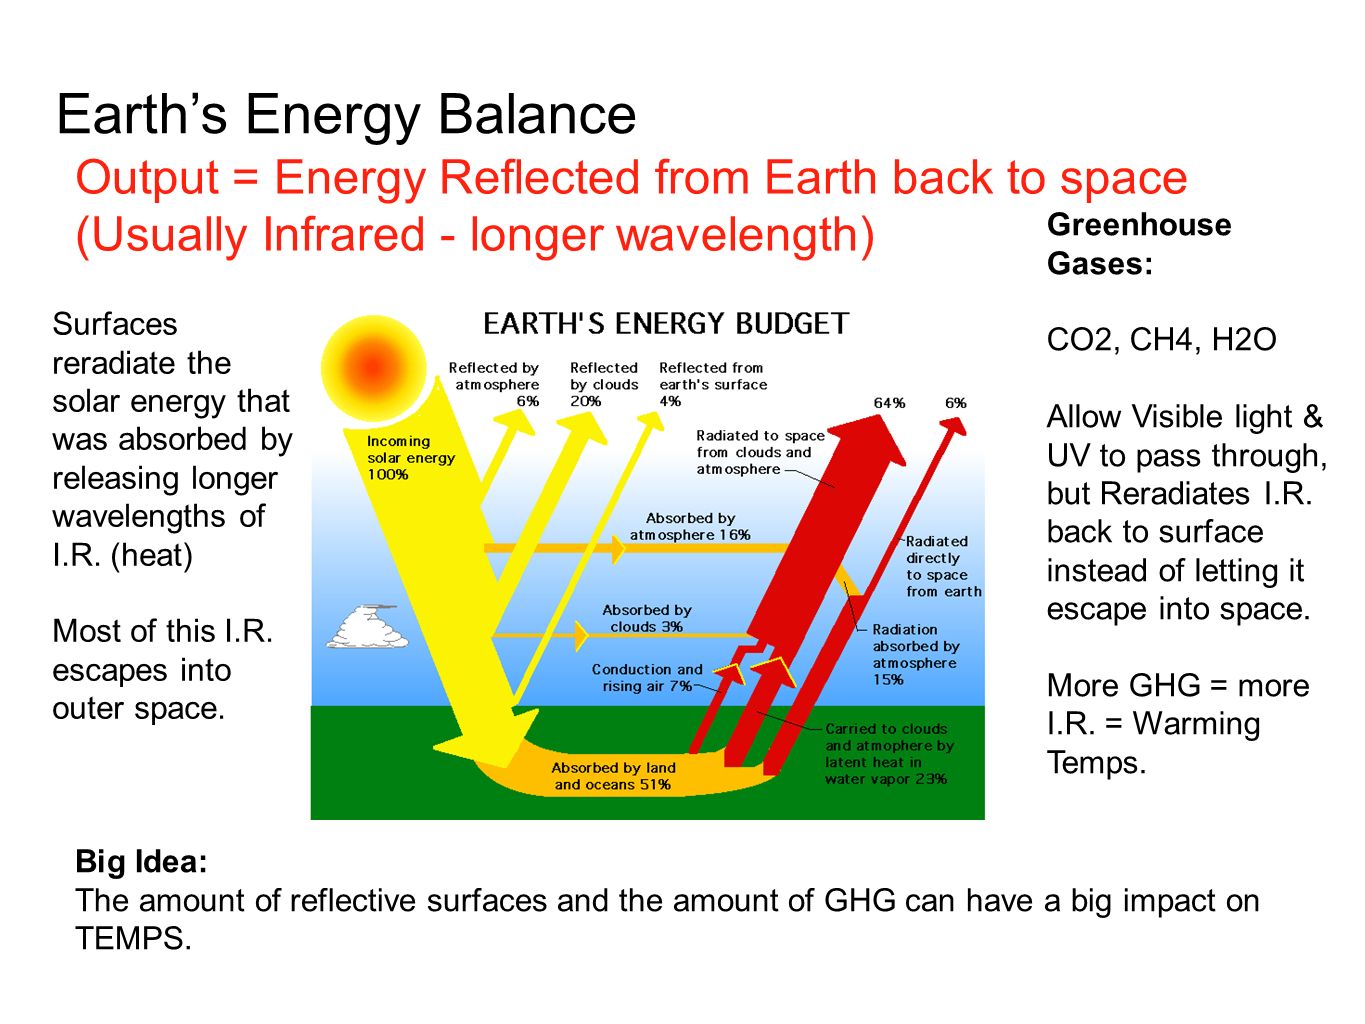 Earth’s Energy Balance Output = Energy Reflected from Earth back to space (Usually Infrared - longer wavelength) Greenhouse Gases: CO2, CH4, H2O Allow Visible light & UV to pass through, but Reradiates I.R.